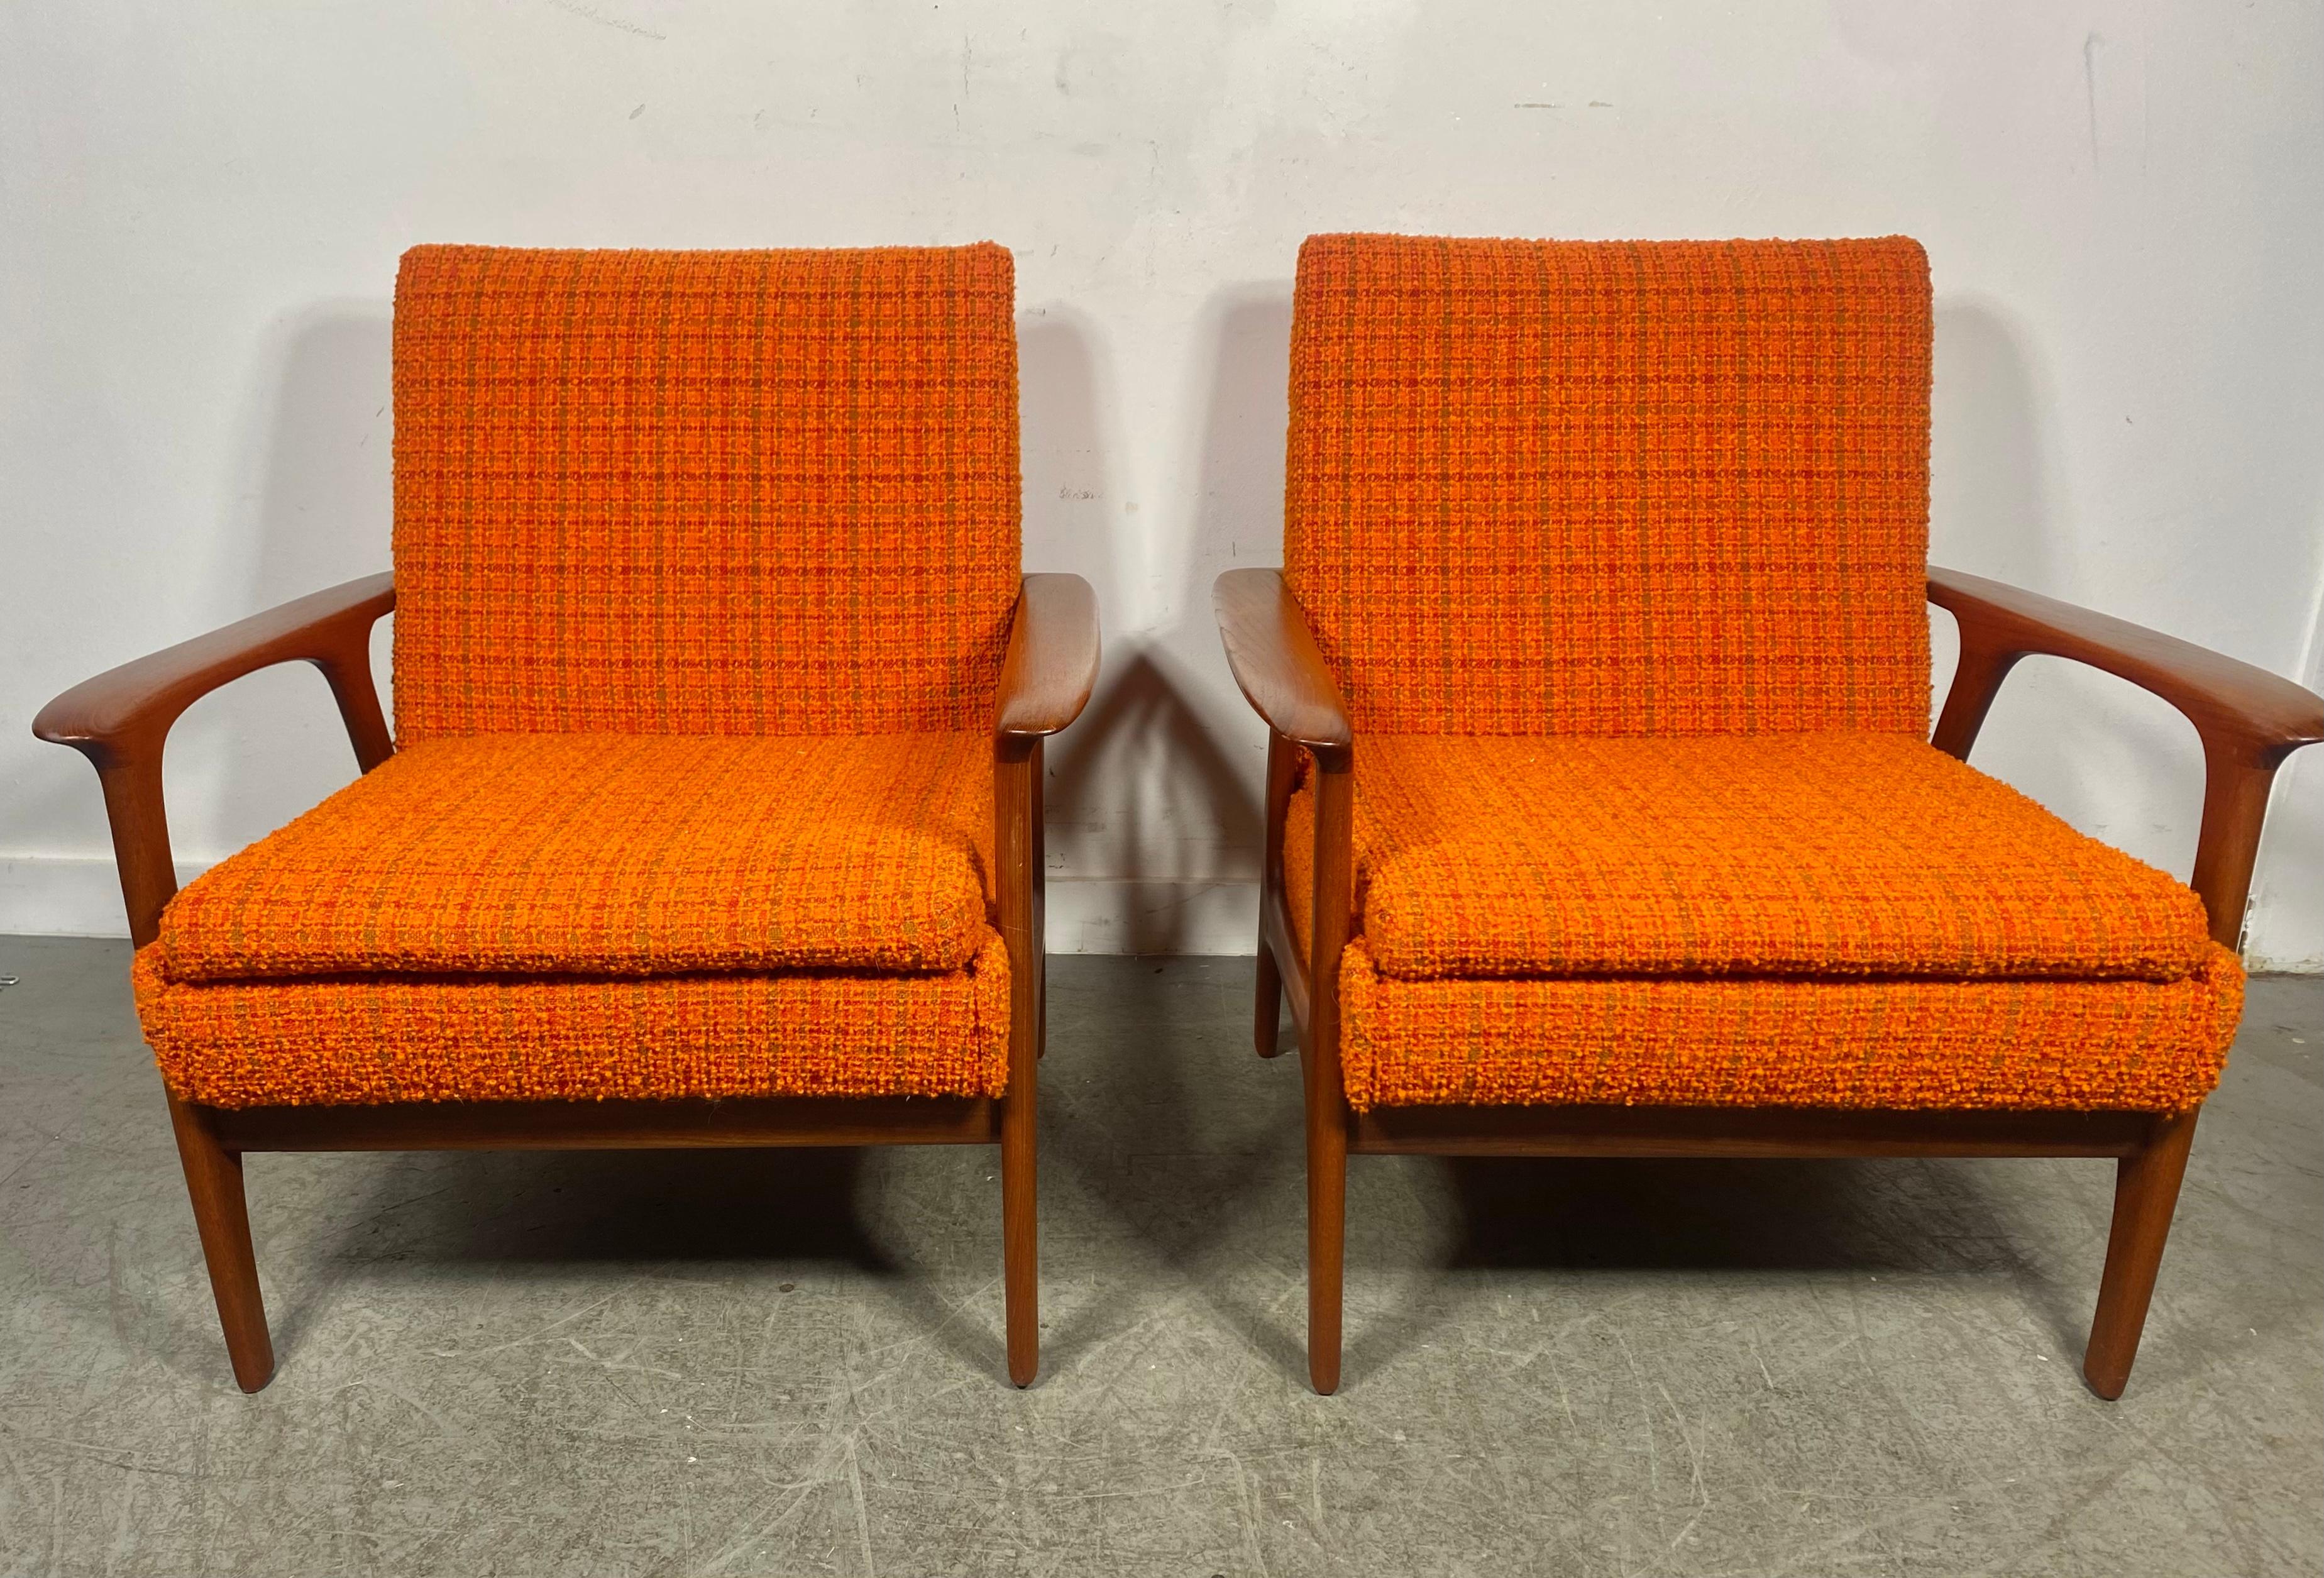 Classic PAIR Scandinavian Modern Teak Lounge Chairs , manner Of Hans Wegner. Superior quality and construction.Classic ,sleek deign. Retains original orange color wool fabric upholstery in excellent original condition. interior seat cushions just